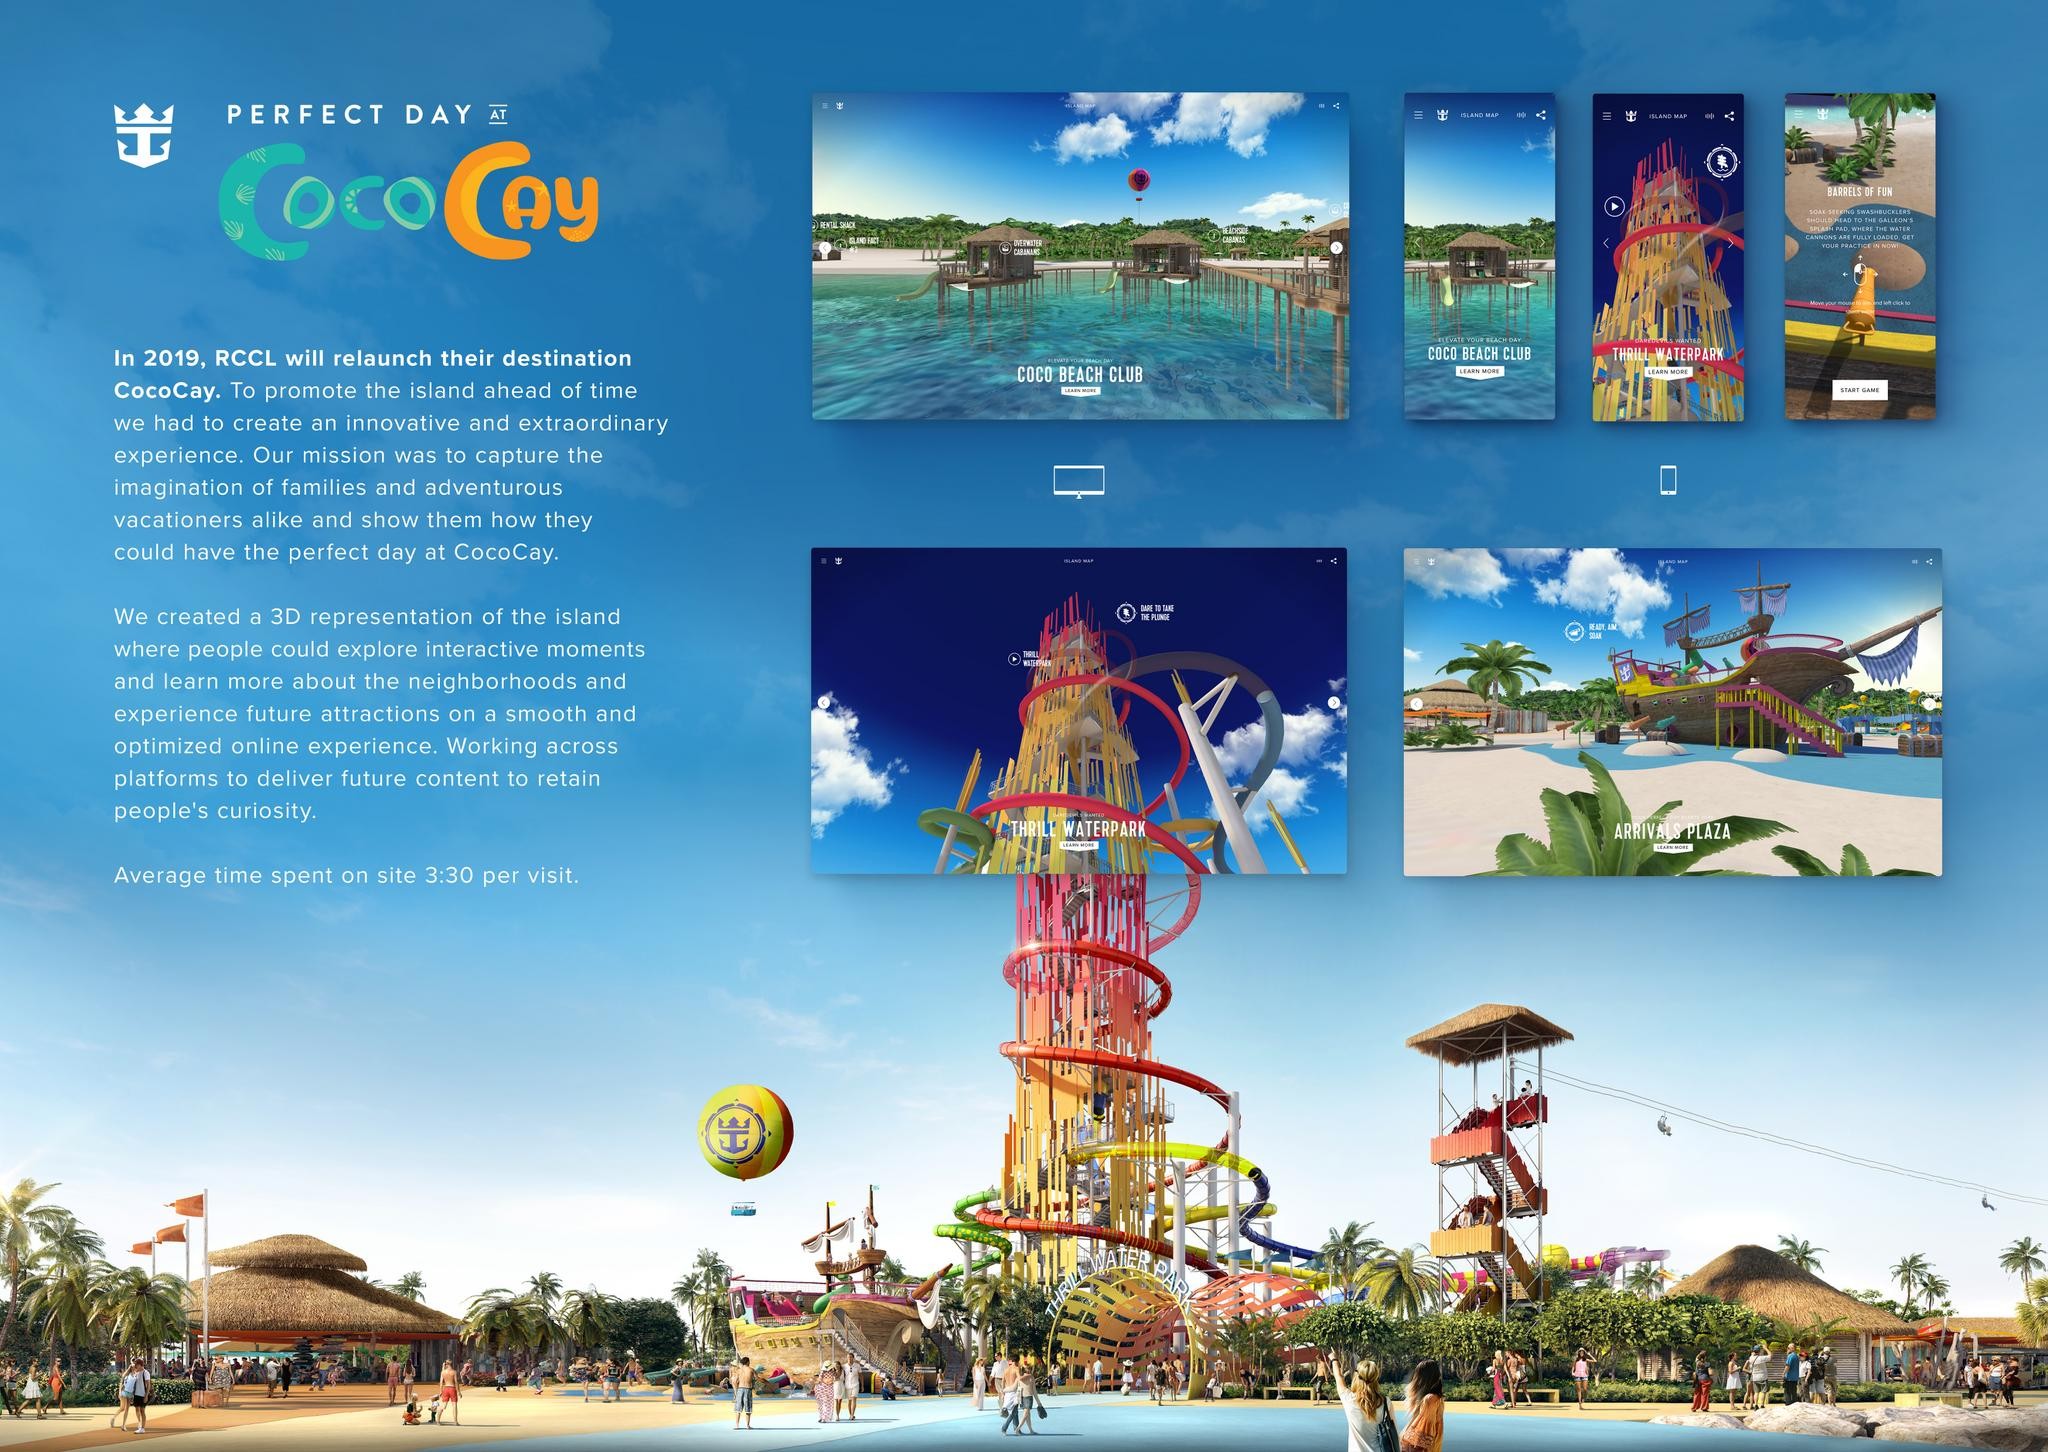 The Perfect Day at Cococay